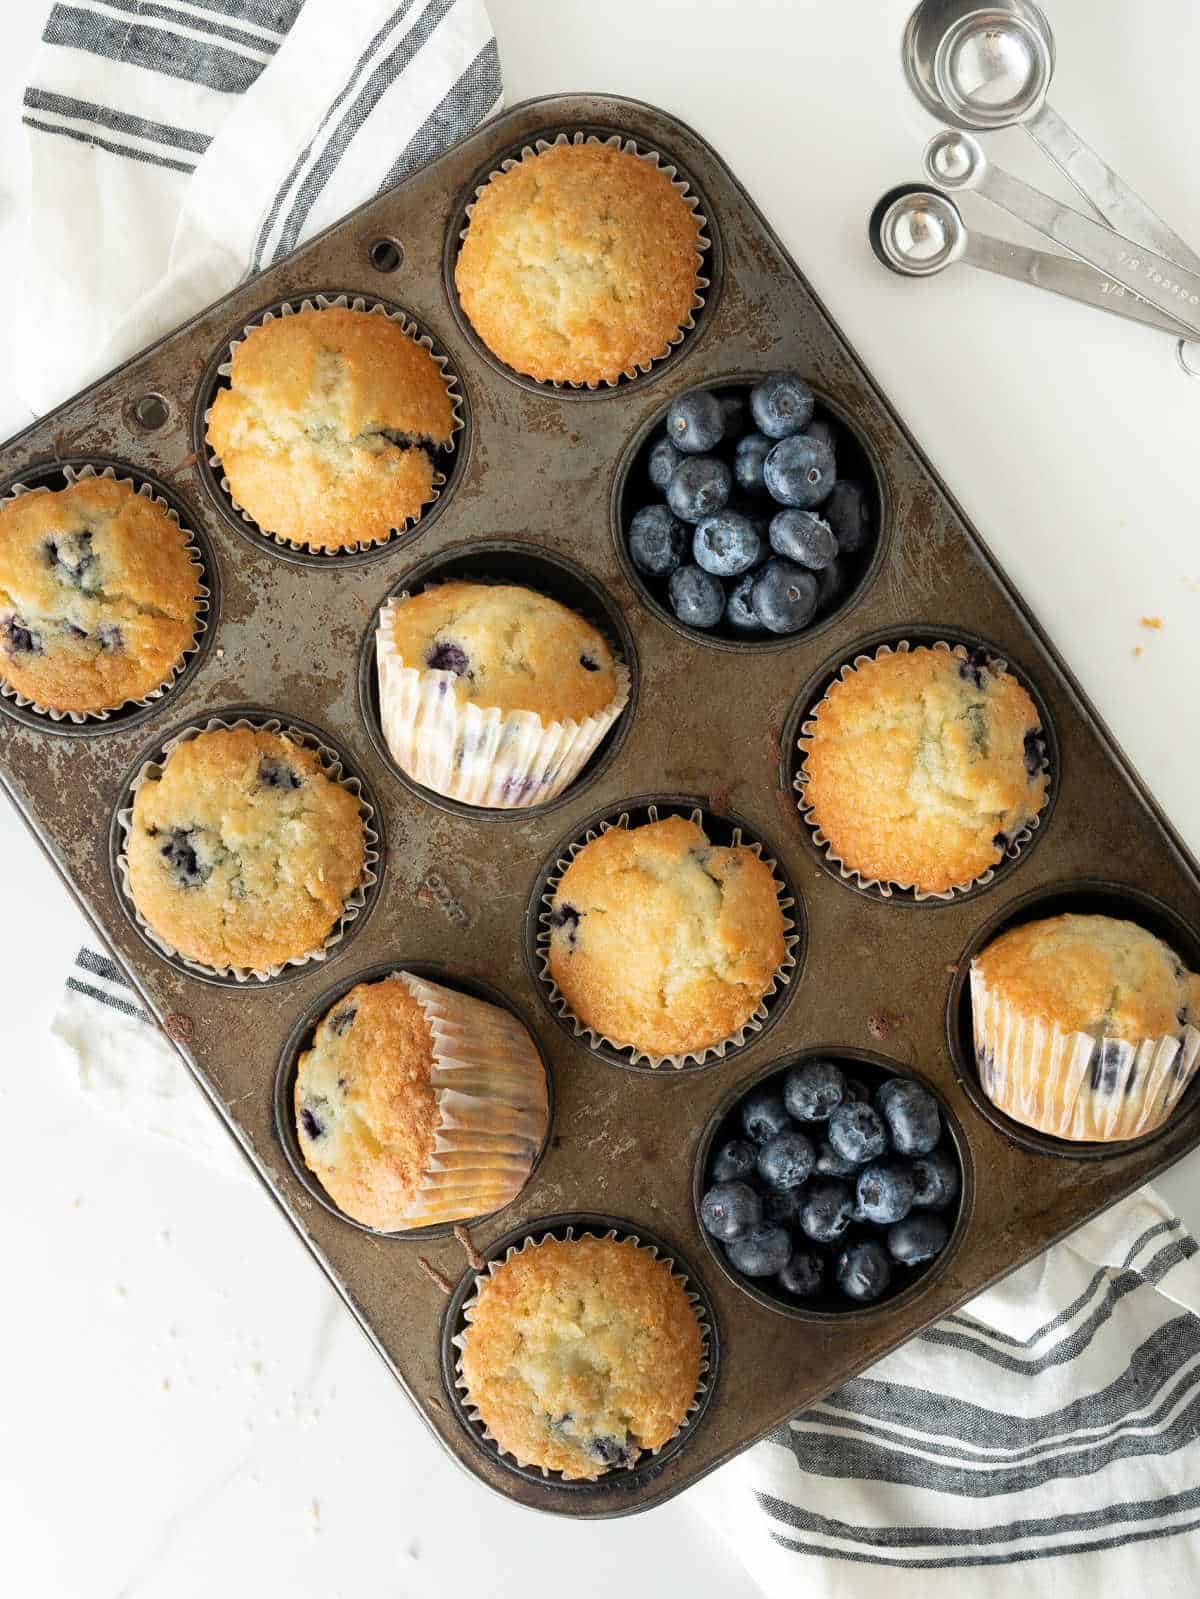 Several blueberry muffins in the metal pan with fresh blueberries. White surface, grey striped cloth. Top view. 